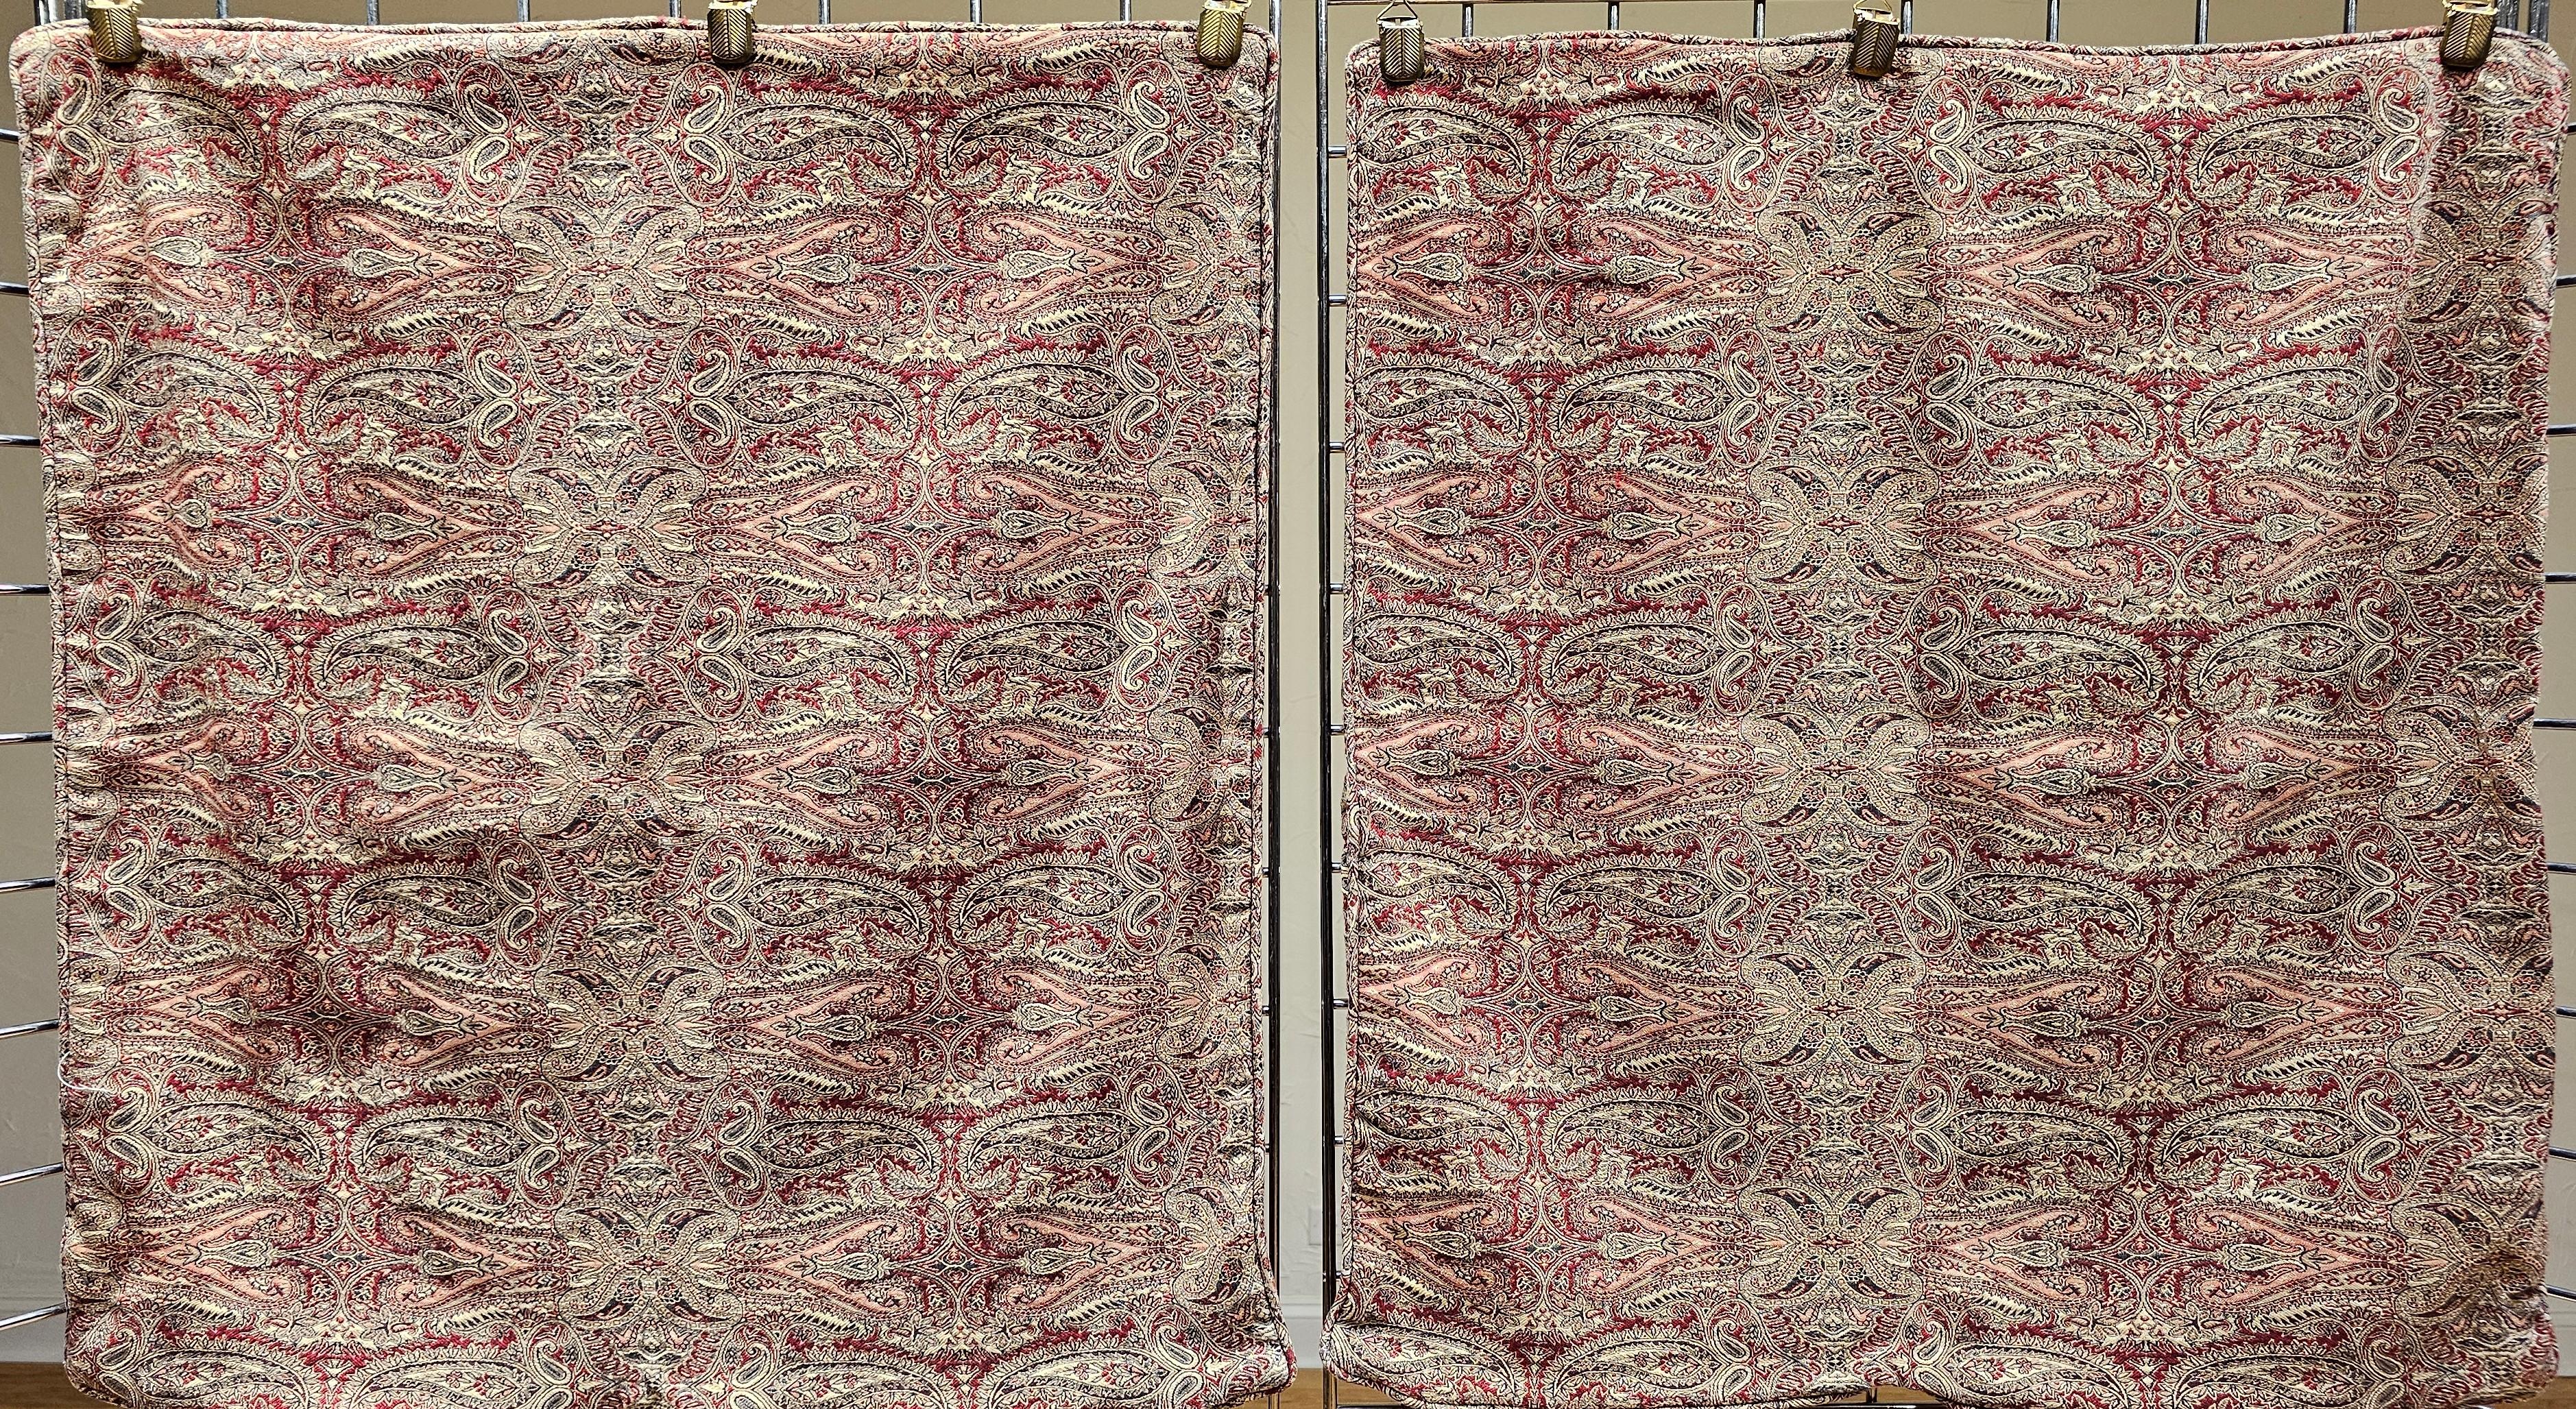 A pair of handwoven Paisley Shawl Pillow Cases (floor cushions) from the early 20th century.  The Paisley Shawls became very popular during the reign of Queen Victoria in the mid-1800s.
Dimensions:  25” x 29” X .5